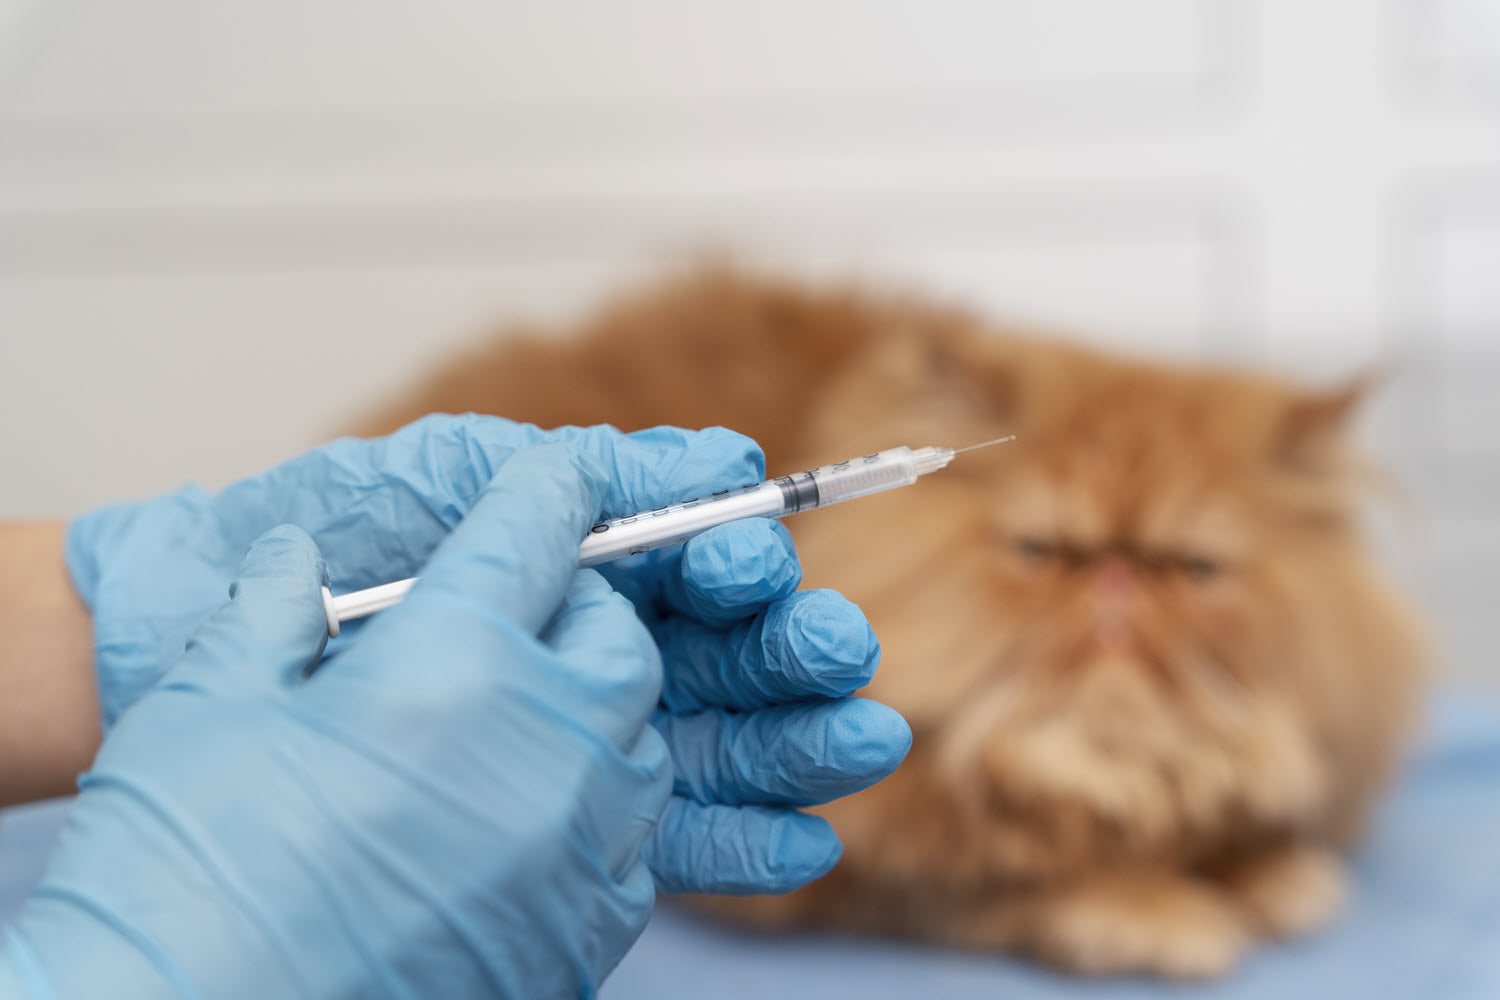 Diabetic Pets - How can we care better for them